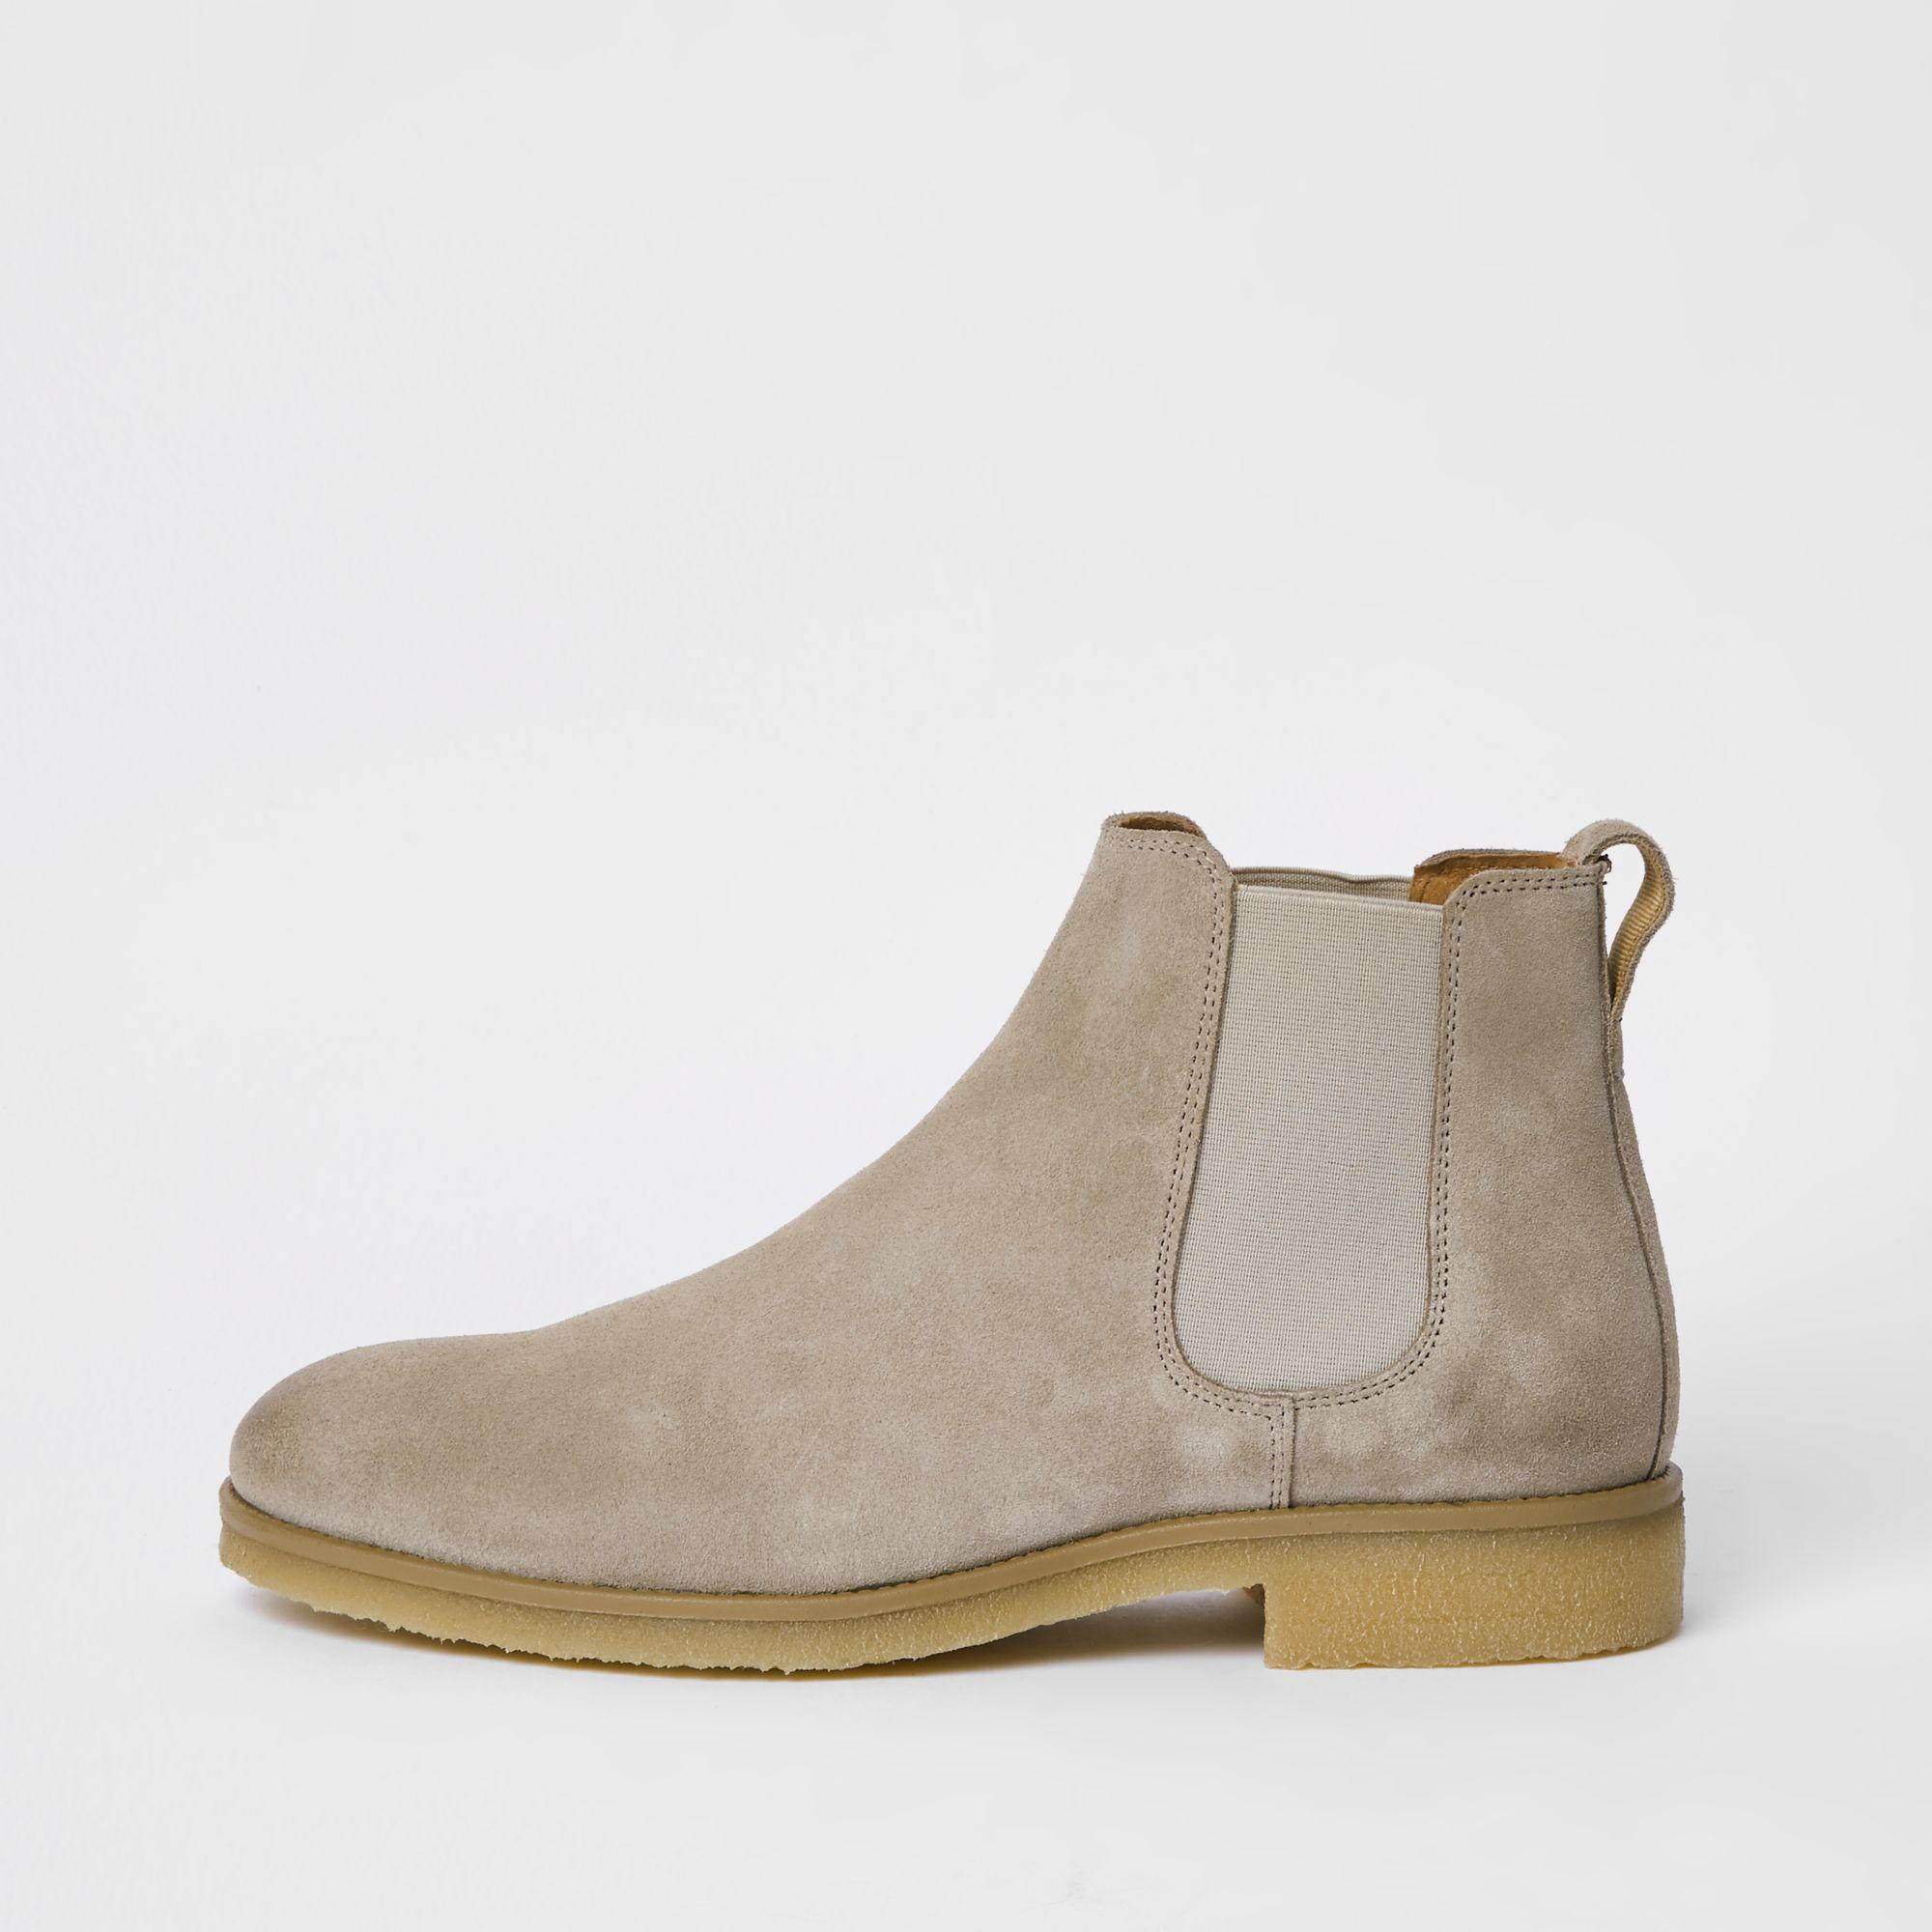 River Island Stone Wide Fit Suede 